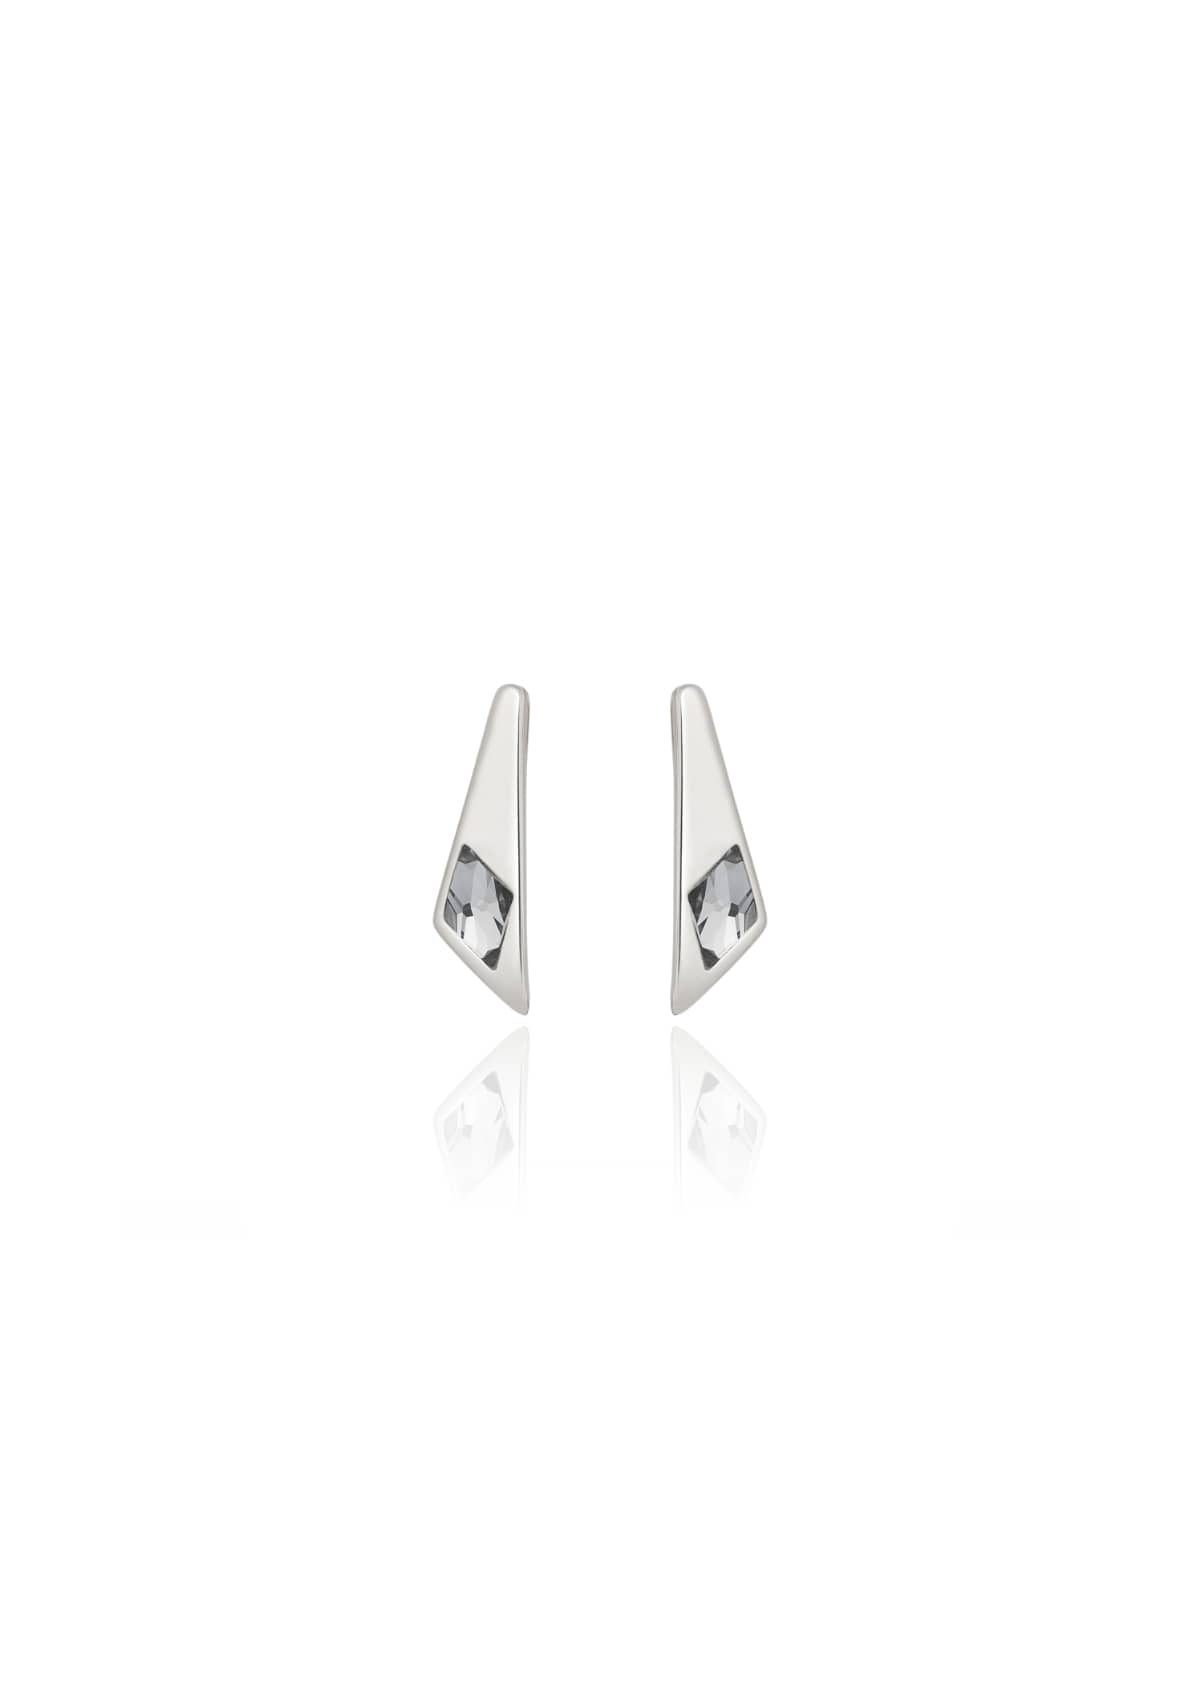 Superstition Silver Earrings -UNOde50- Ruby Jane-